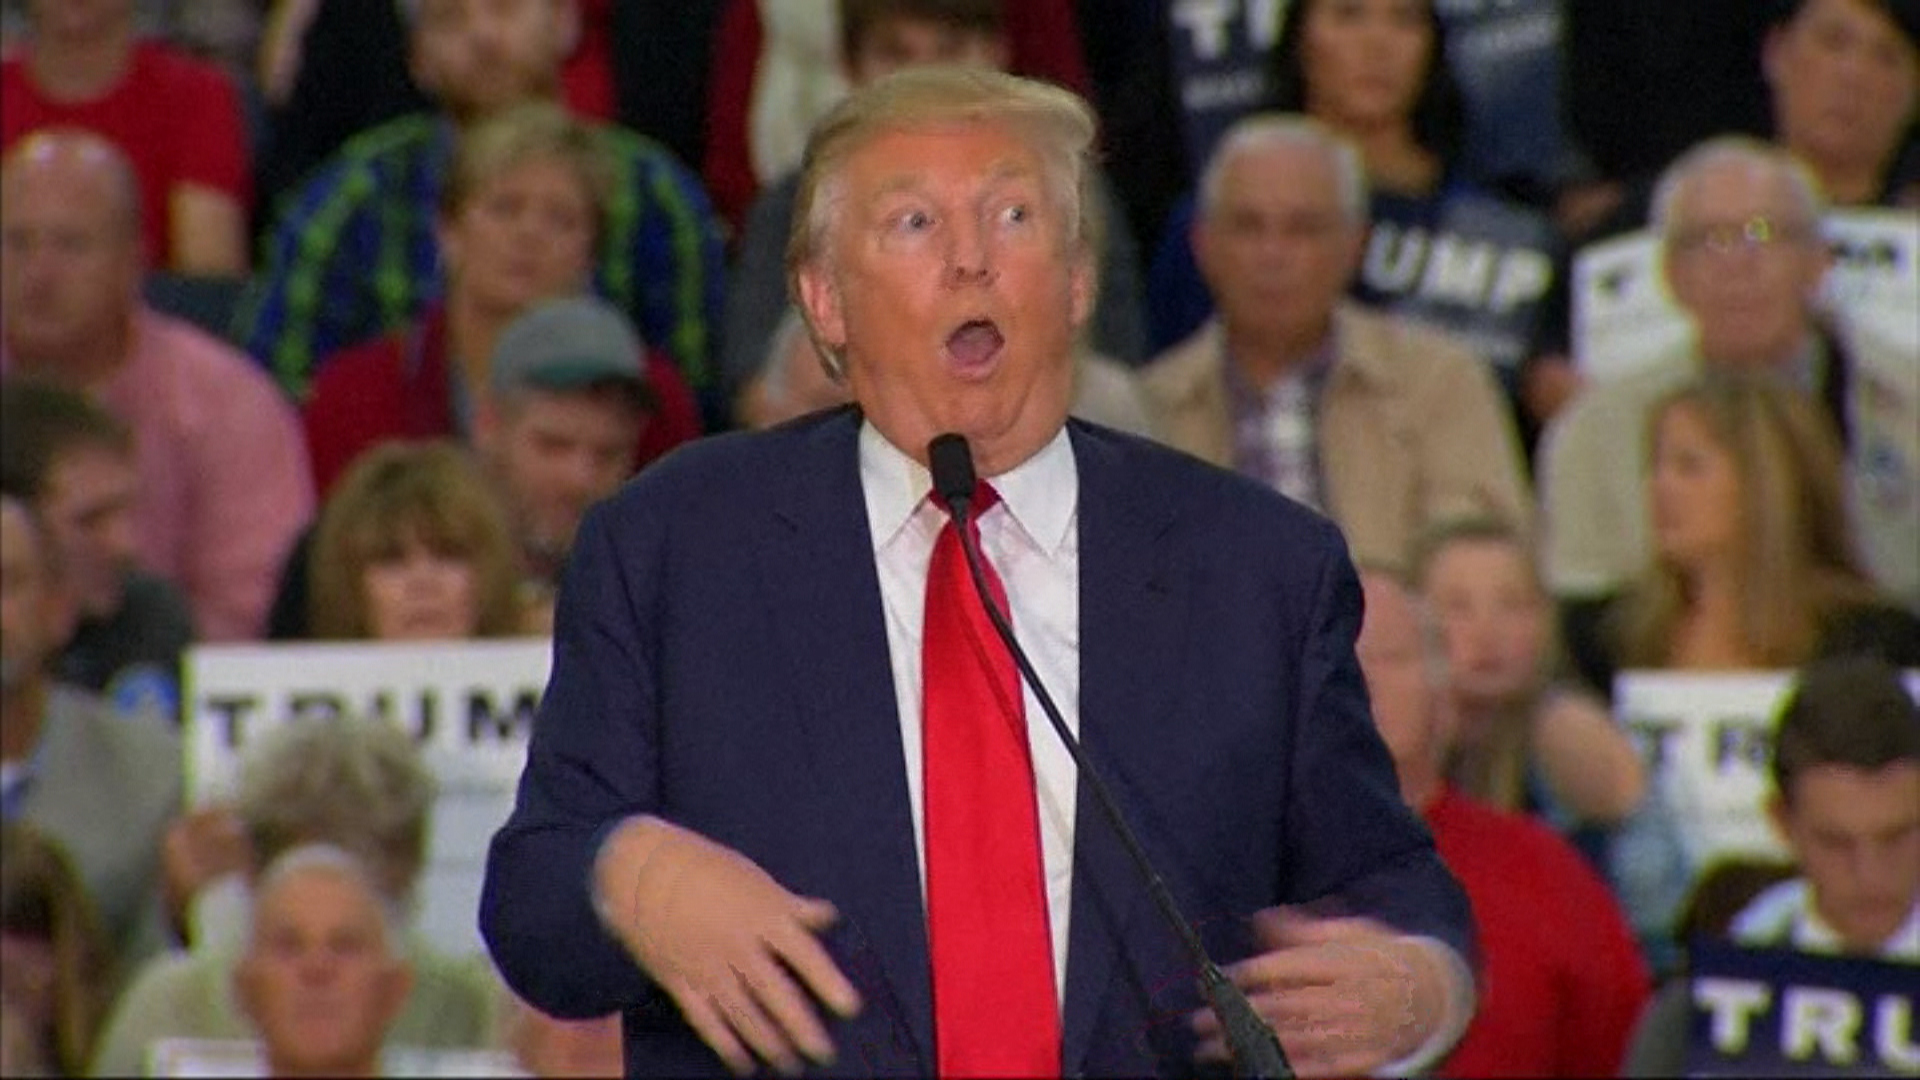 Image result for trump mocks reporter with disability snopes